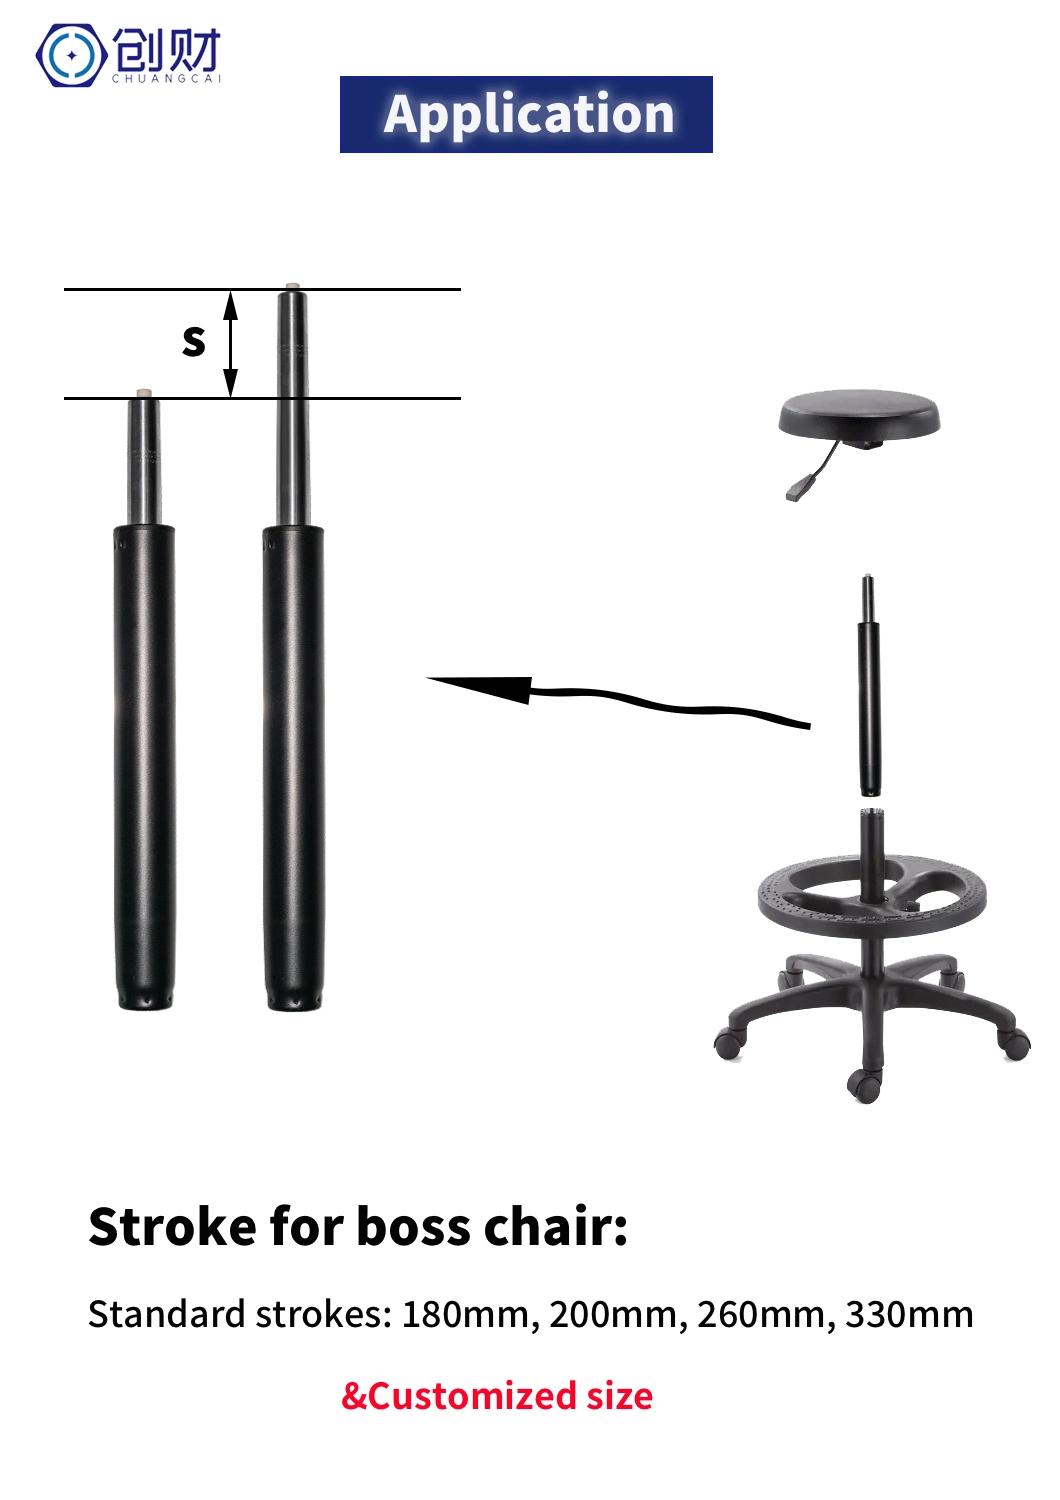 Interchangeable Auto-Return Gas Spring for Bar Chair